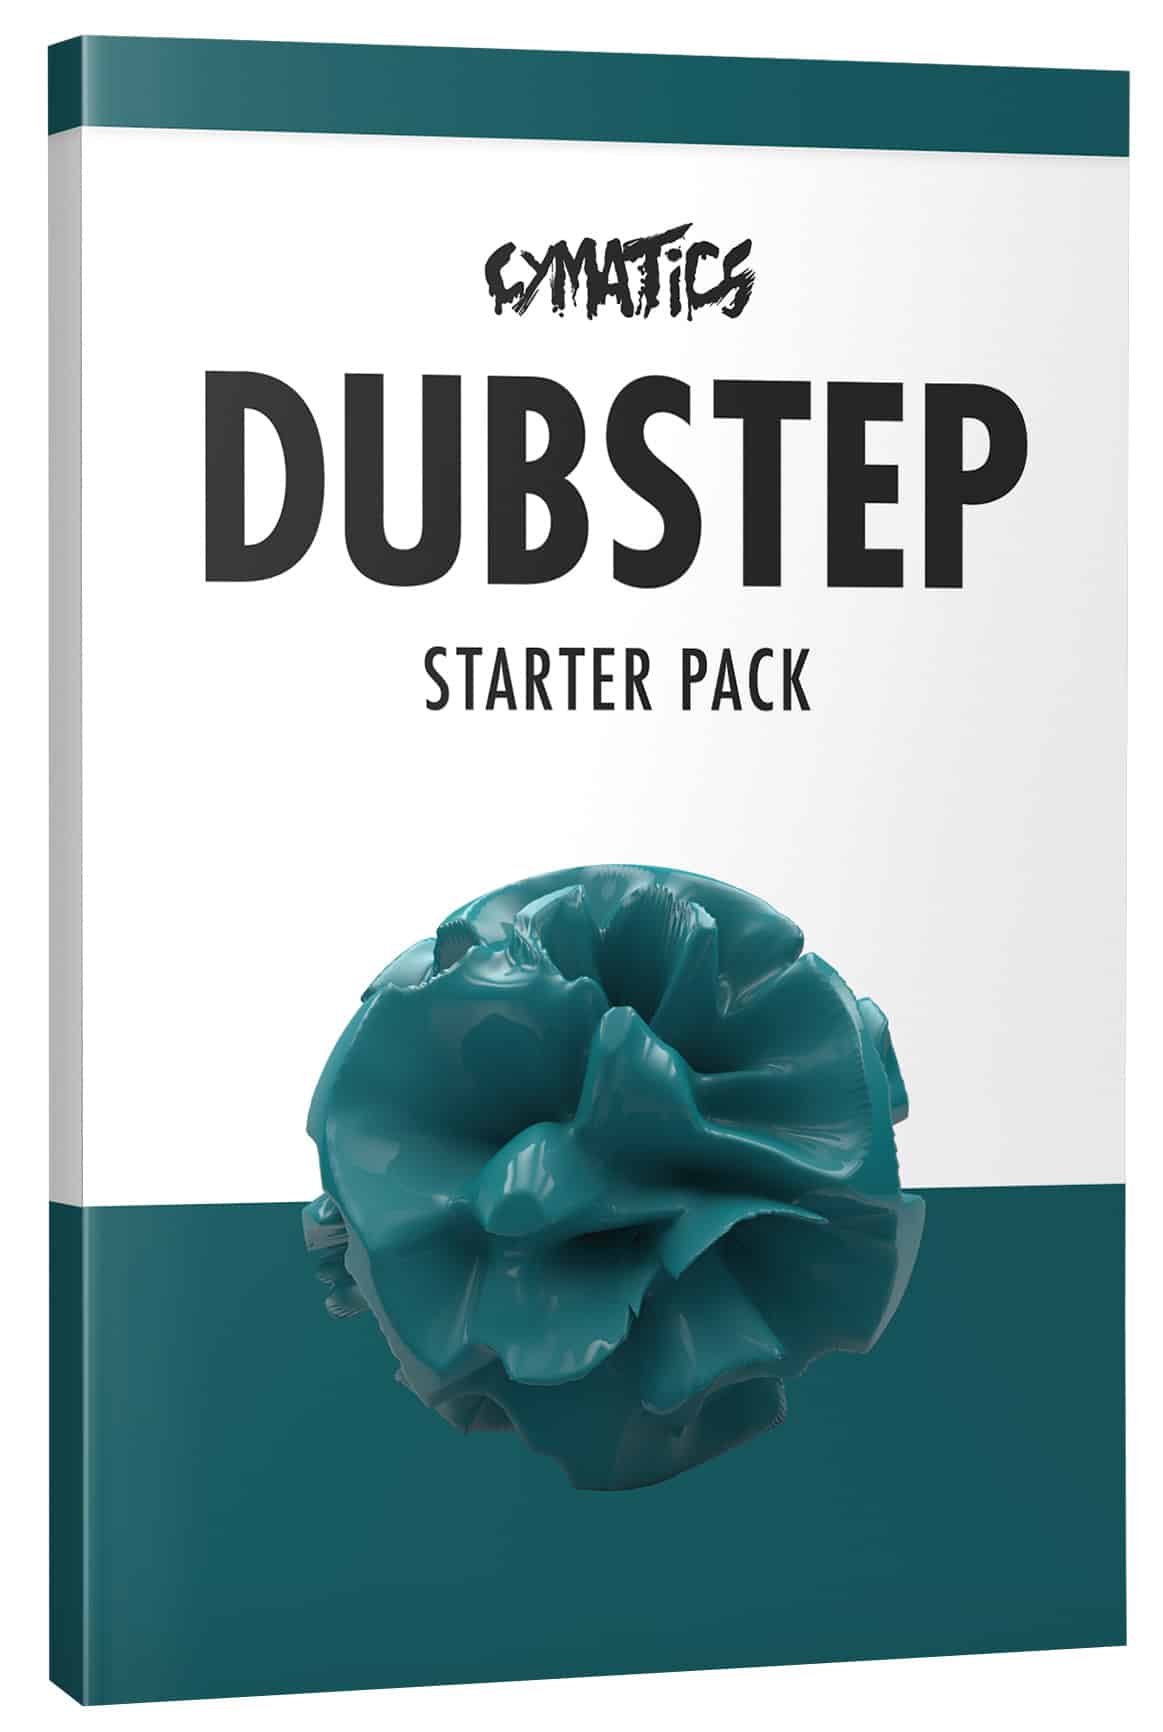 Dubstep lovers, get ready to ignite your musical passion with this ultimate Dubstep starter pack. Packed with everything you need to embark on a journey into the exhilarating world of Dubstep music,